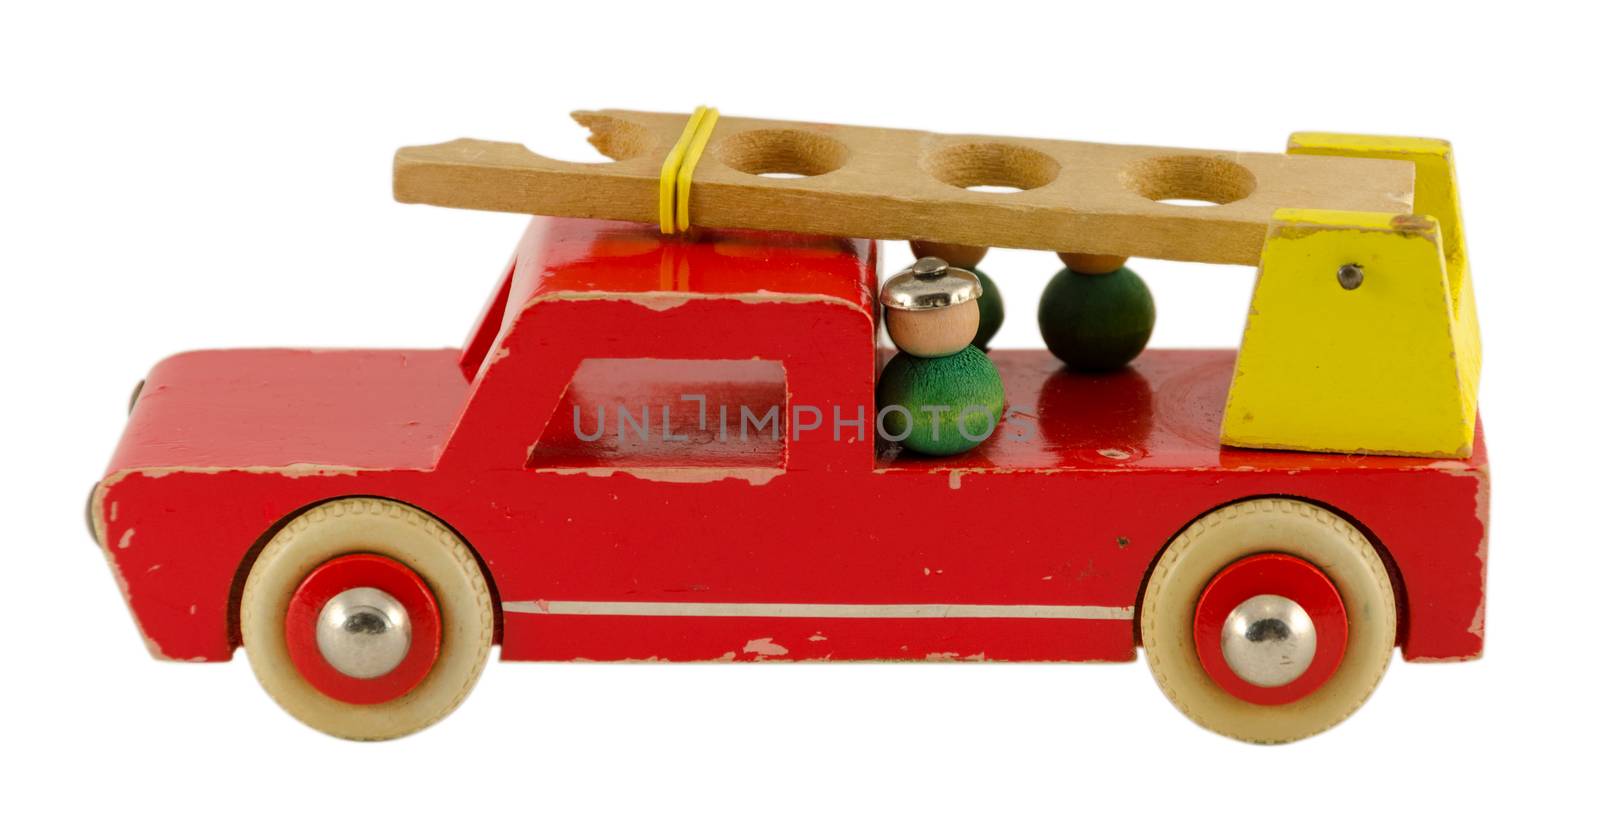 antique wooden fire-engine toy isoalted on white background